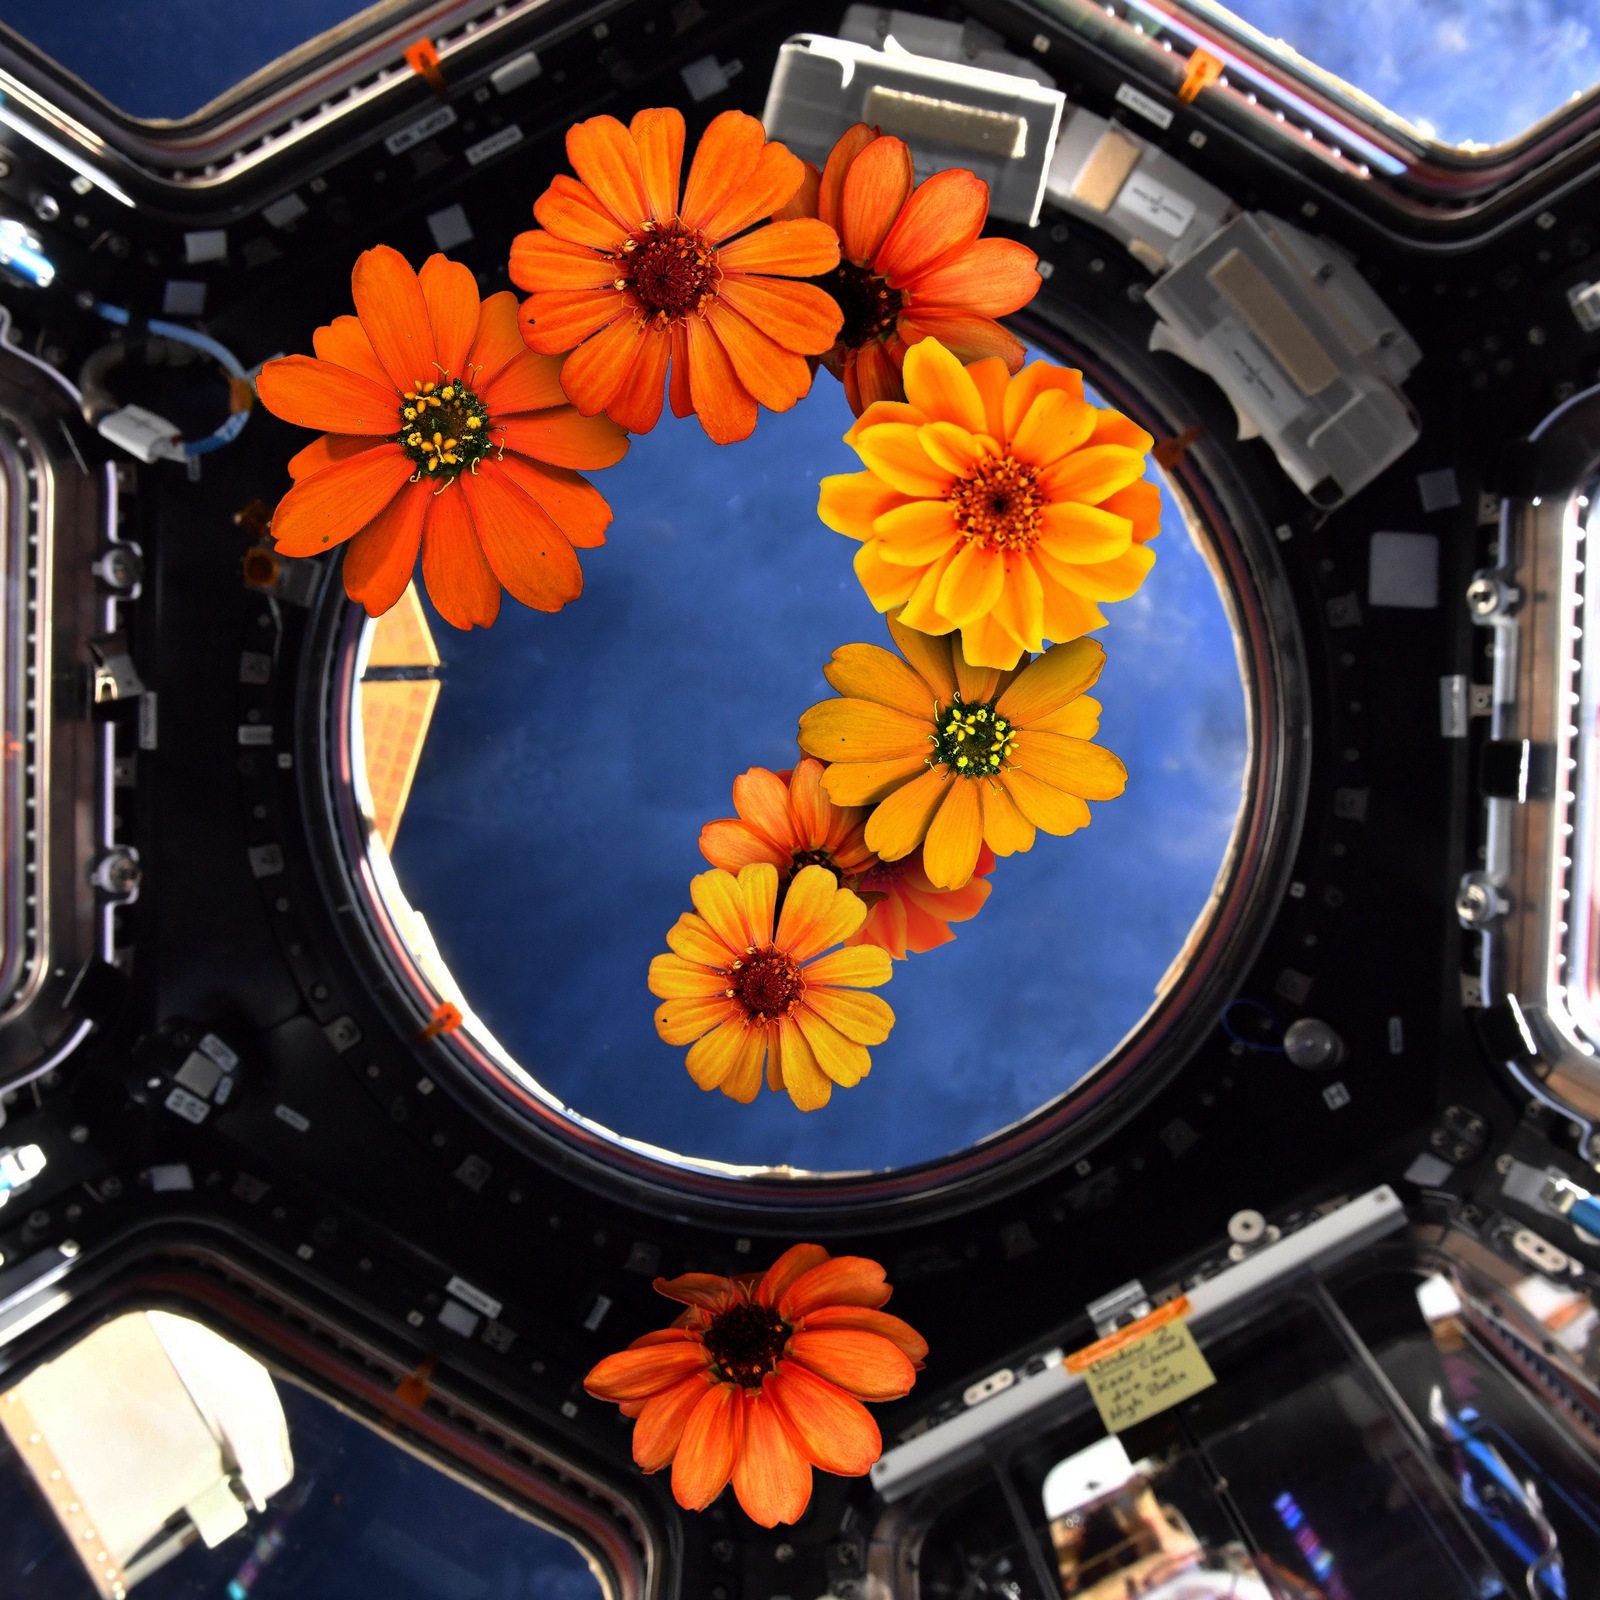 Quiz: What do you know about gardening in space?